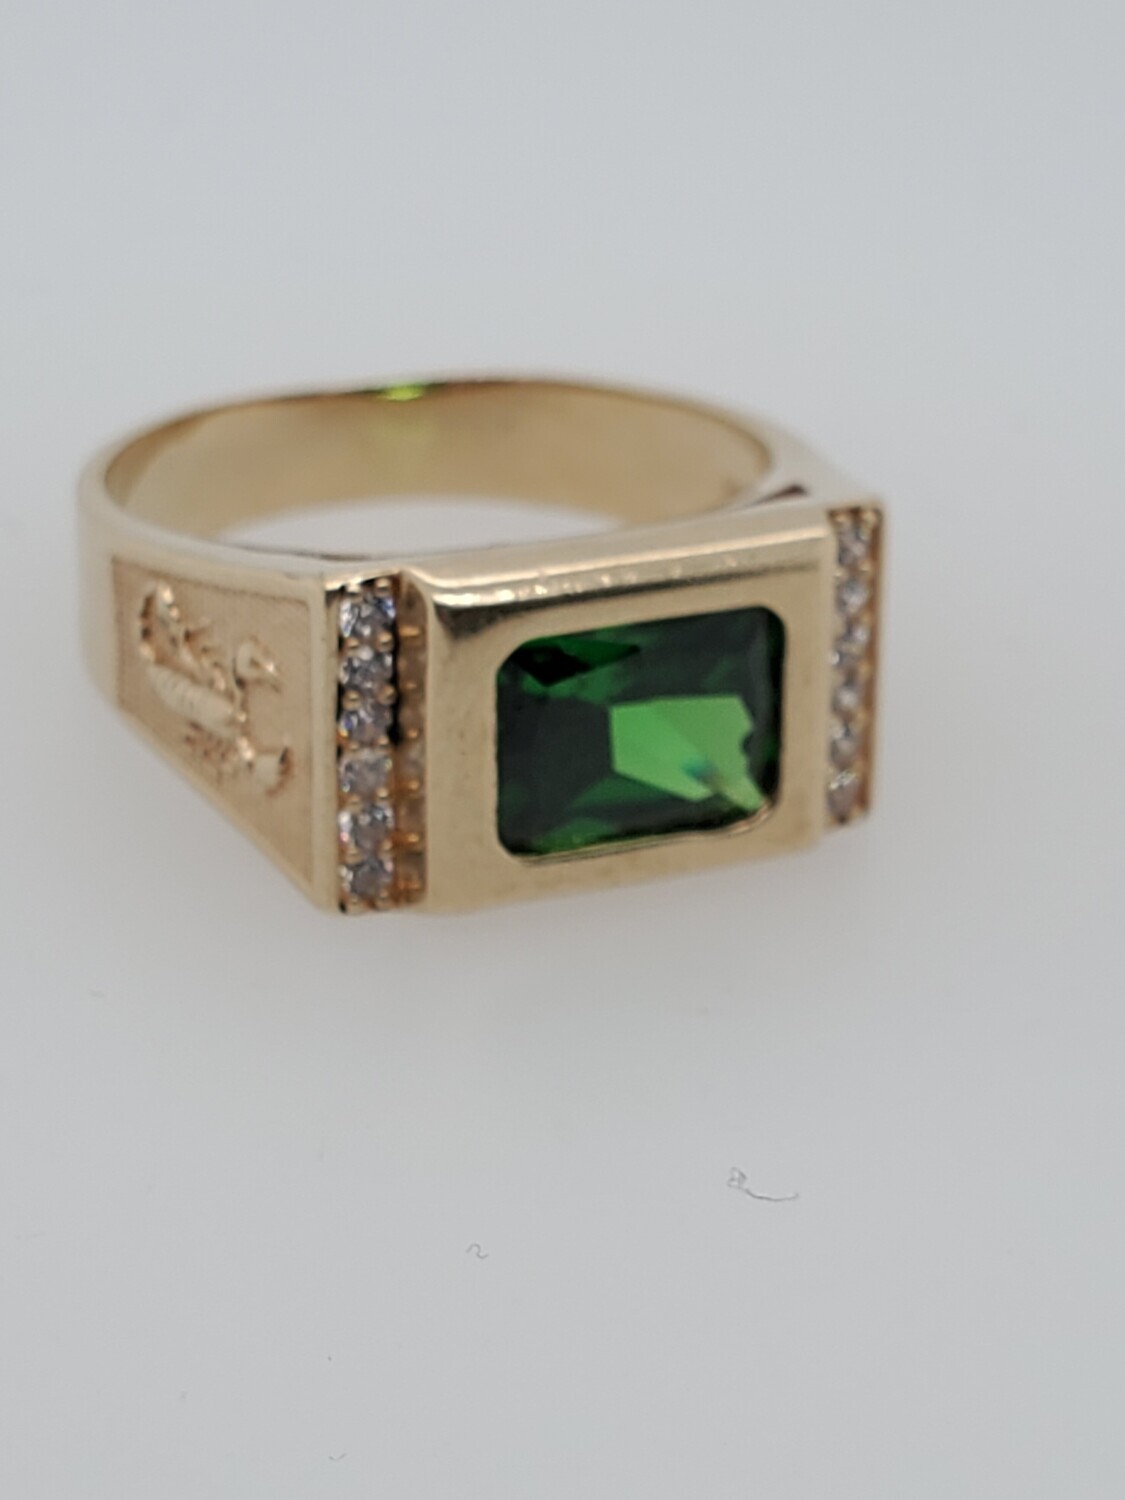 BRAND NEW!! 10k MEN'S RING WITH CENTER GREEN STONE AN CZS  INVENTORY # I-18294 75TH AVE